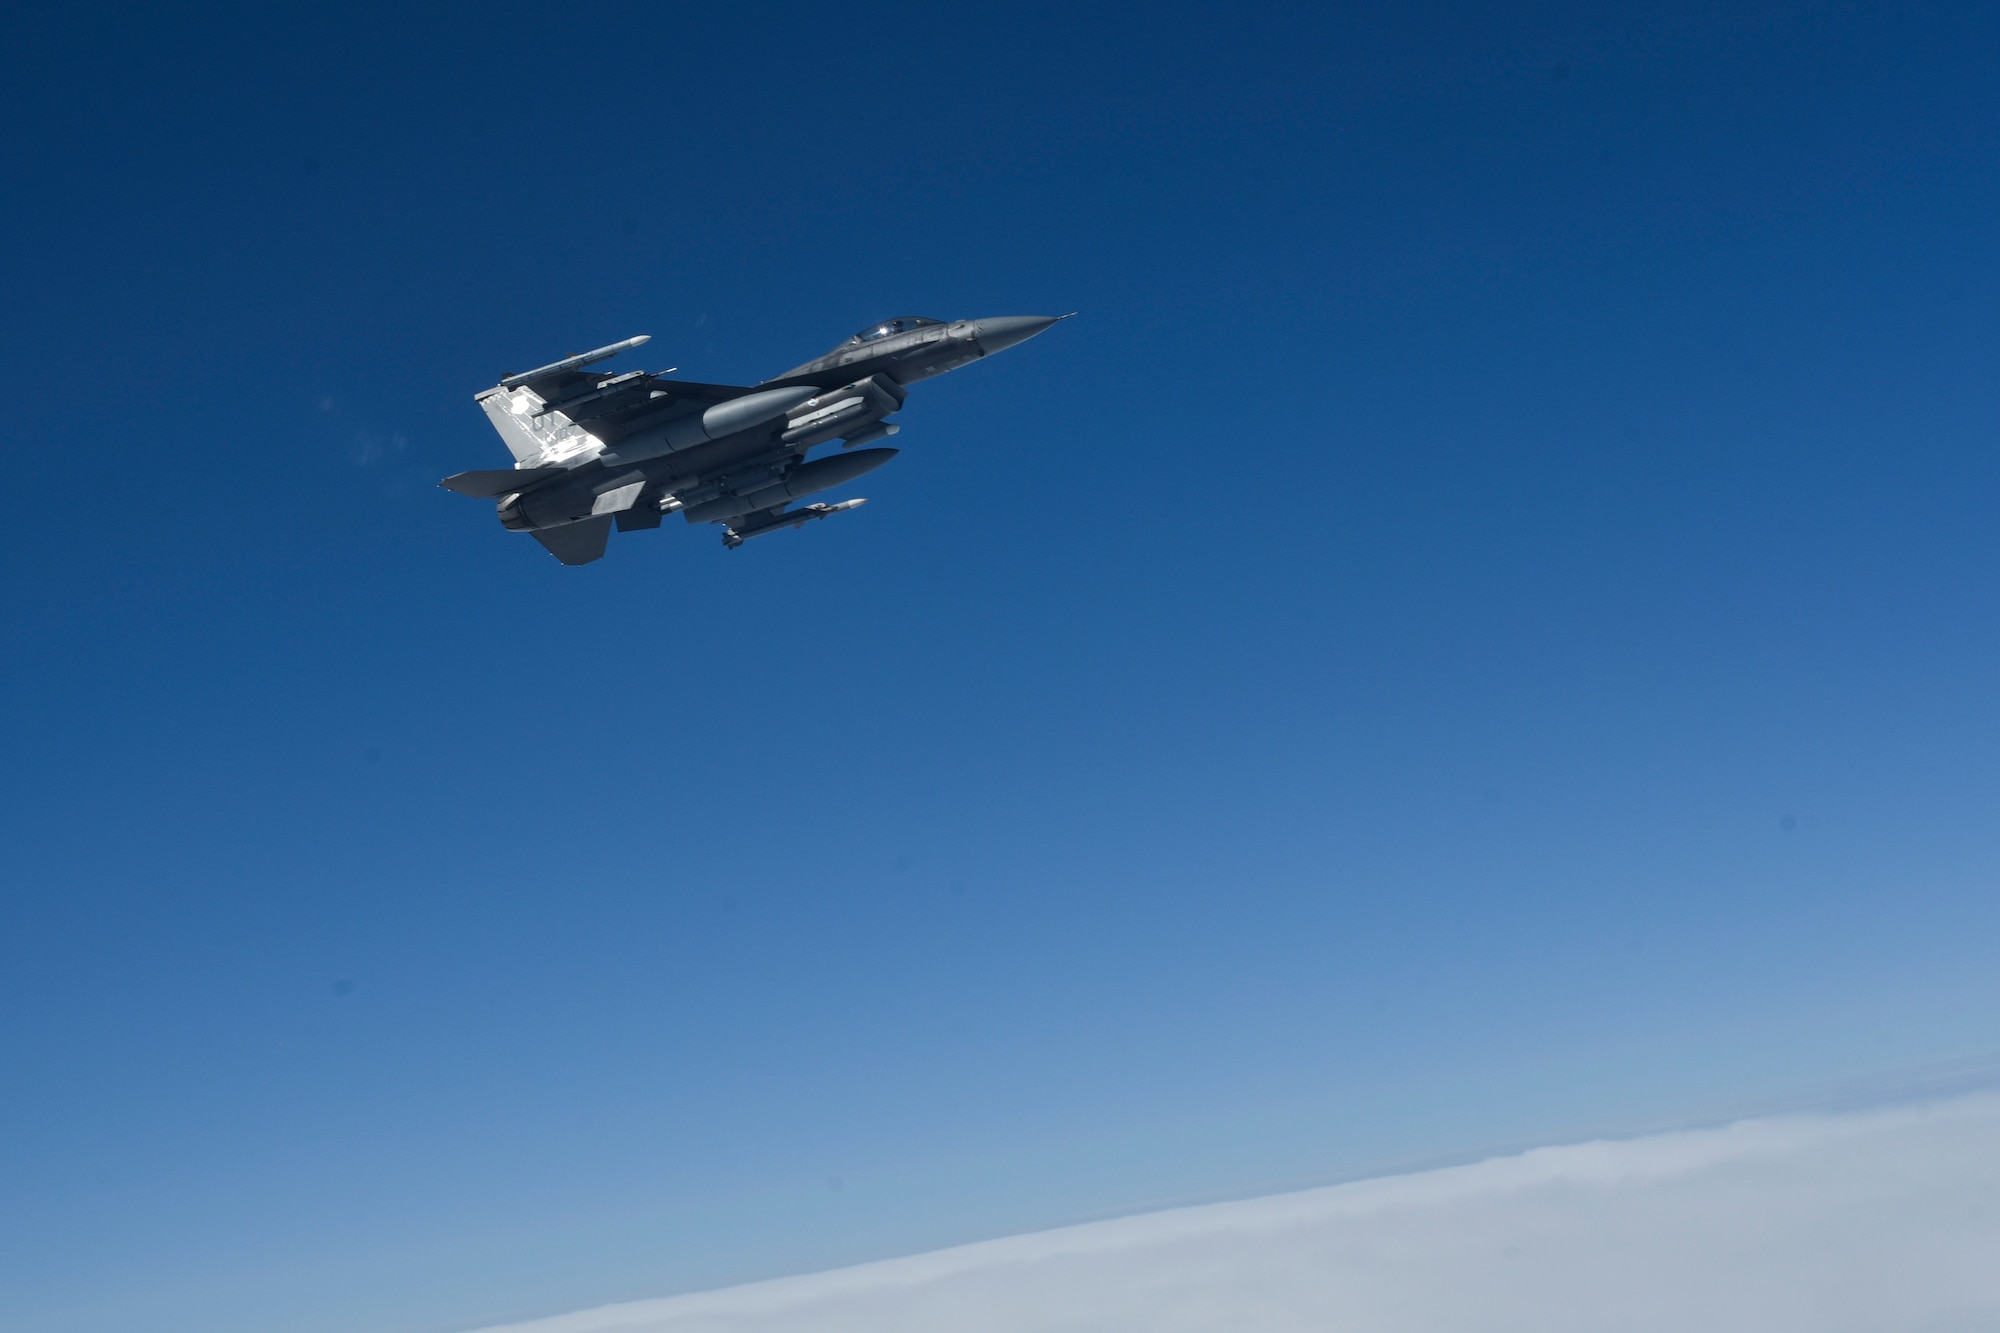 A U.S. Air Force F-16C Fighting Falcon flies alongside a 909th Air Refueling Squadron KC-135R Stratotanker after receiving fuel during Northern Edge (NE19), May 16, 2019, over the Gulf of Alaska.